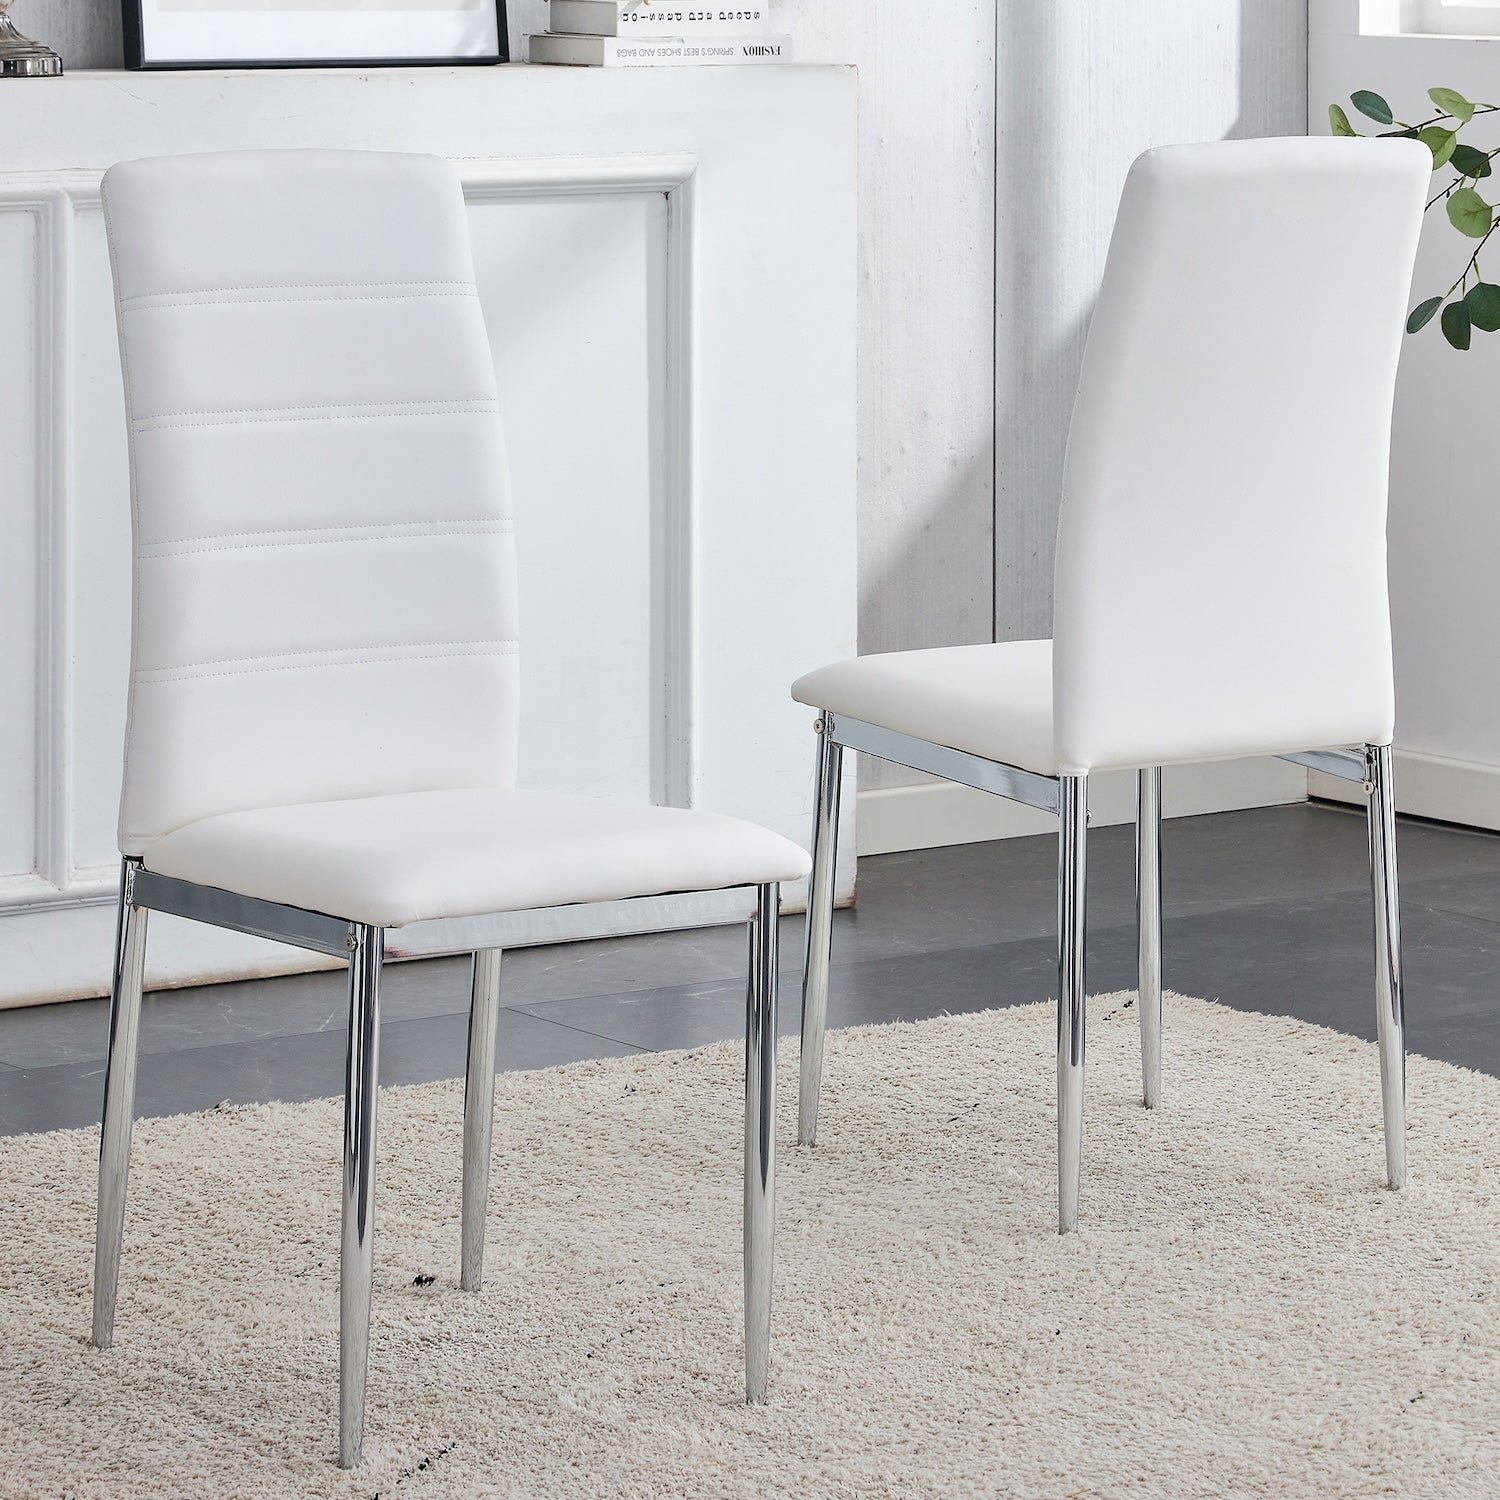 Droom Modern PU Leather High Back Dining Side Chair - White